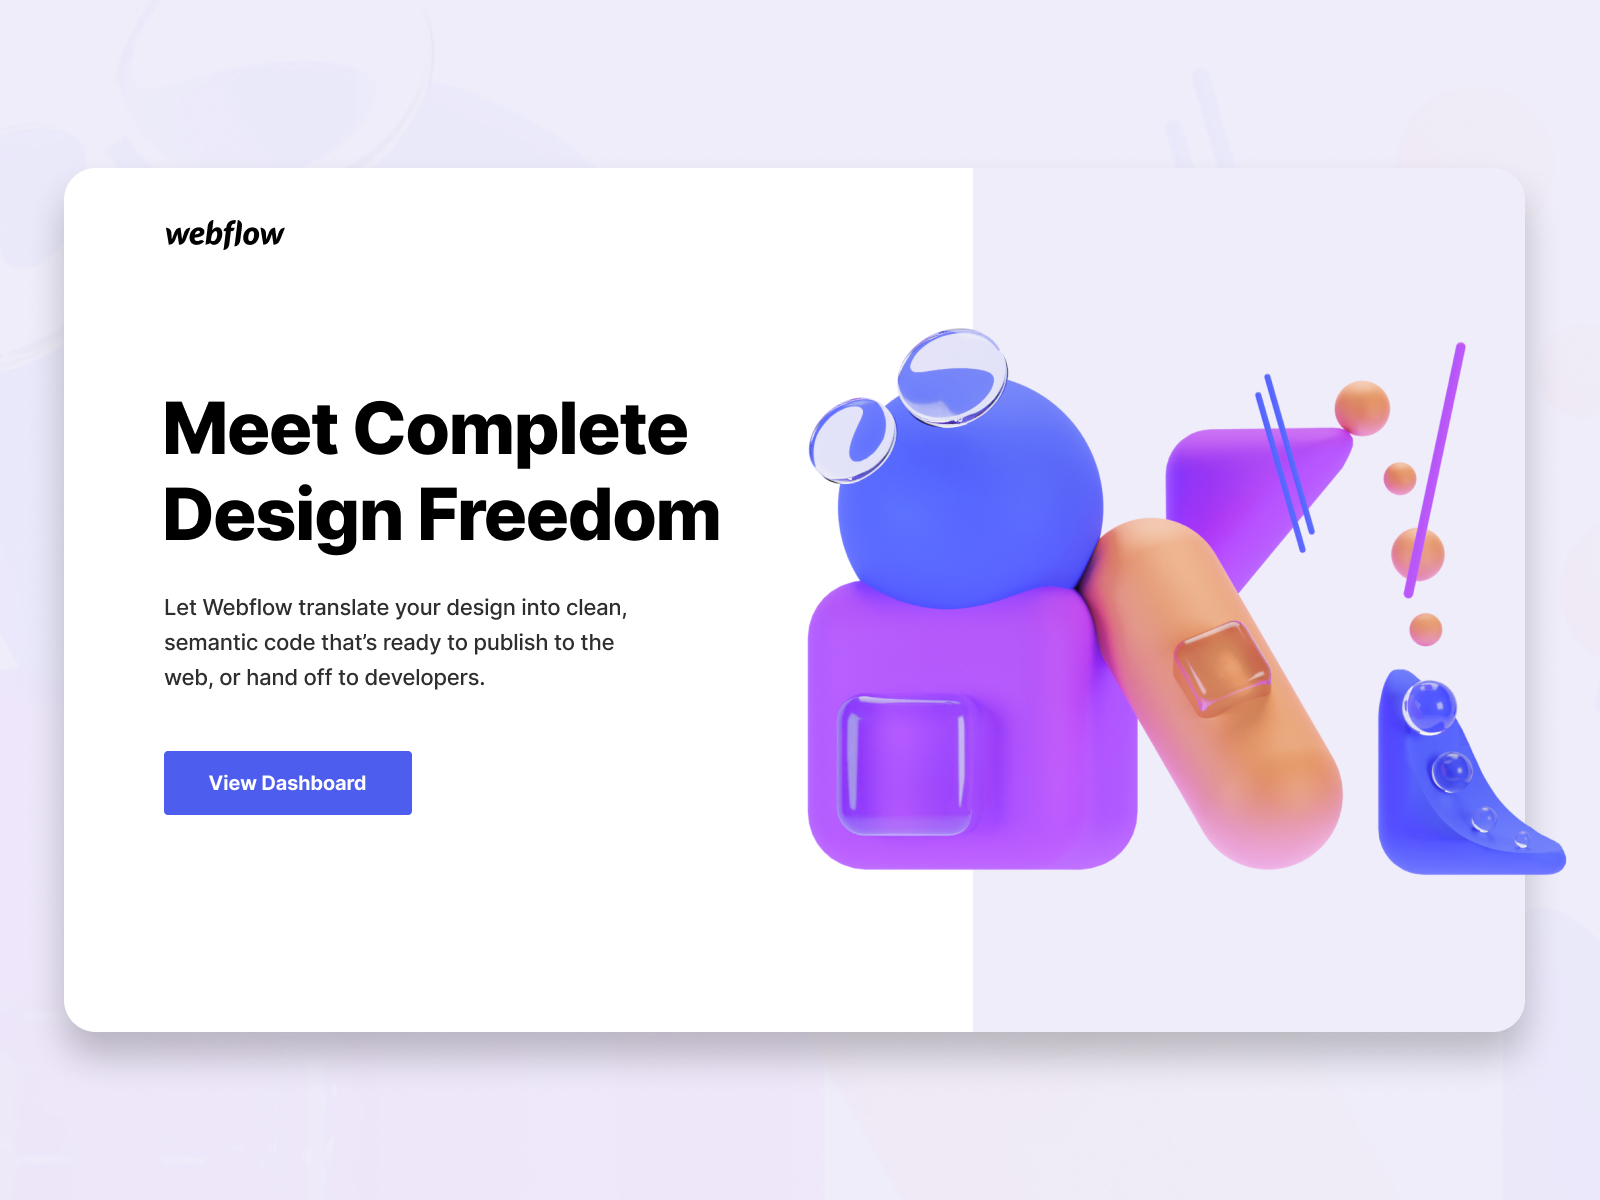 webflow-landing-page-by-alexander-shatov-on-dribbble